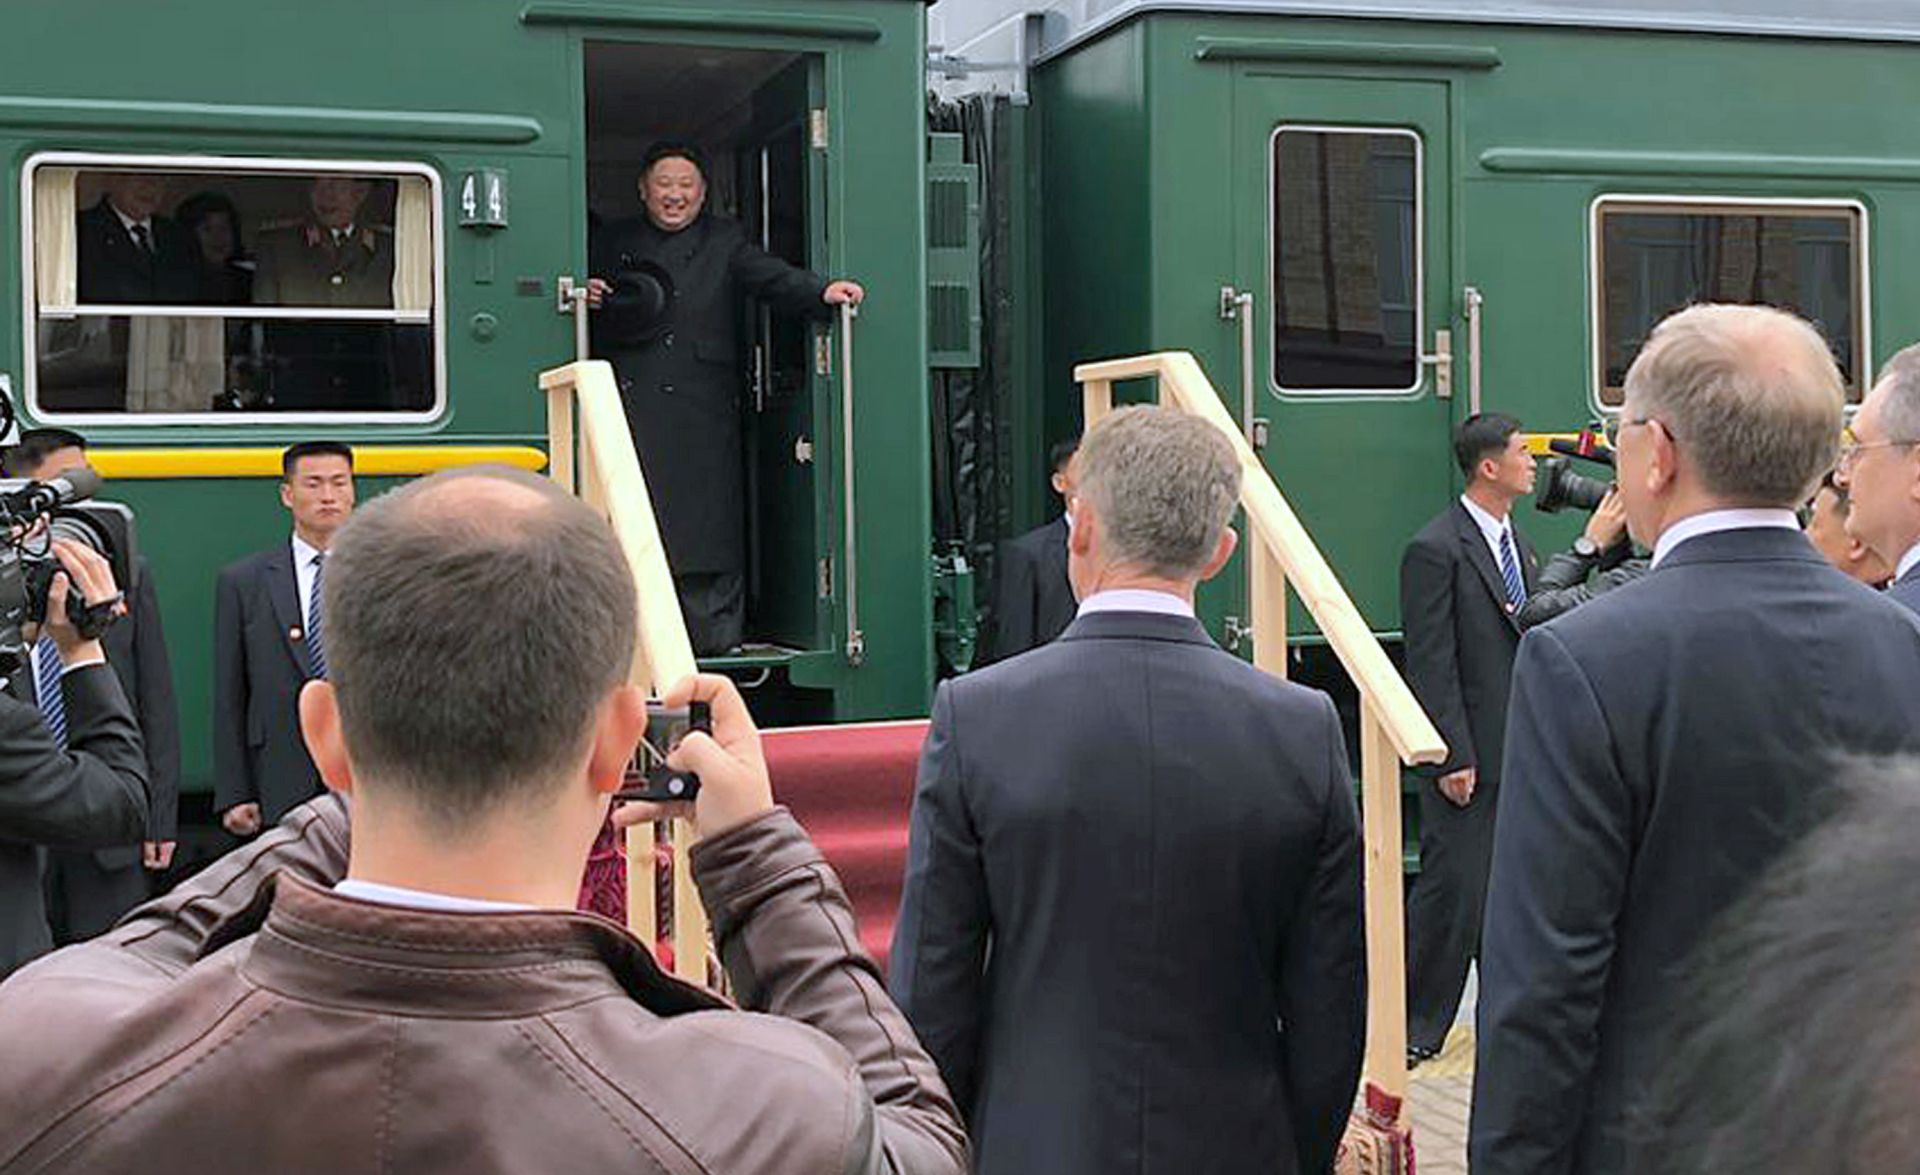 epa07524342 North Korean leader Kim Jong-un (top) is welcomed as he arrives in the Russian border city of Khasan, Russia, 24 April 2019. A summit between North Korean leader Kim Jong-un and Russian President Vladimir Putin is to take place on 25 April 2019 in Vladivostok.  EPA/YONHAP SOUTH KOREA OUT